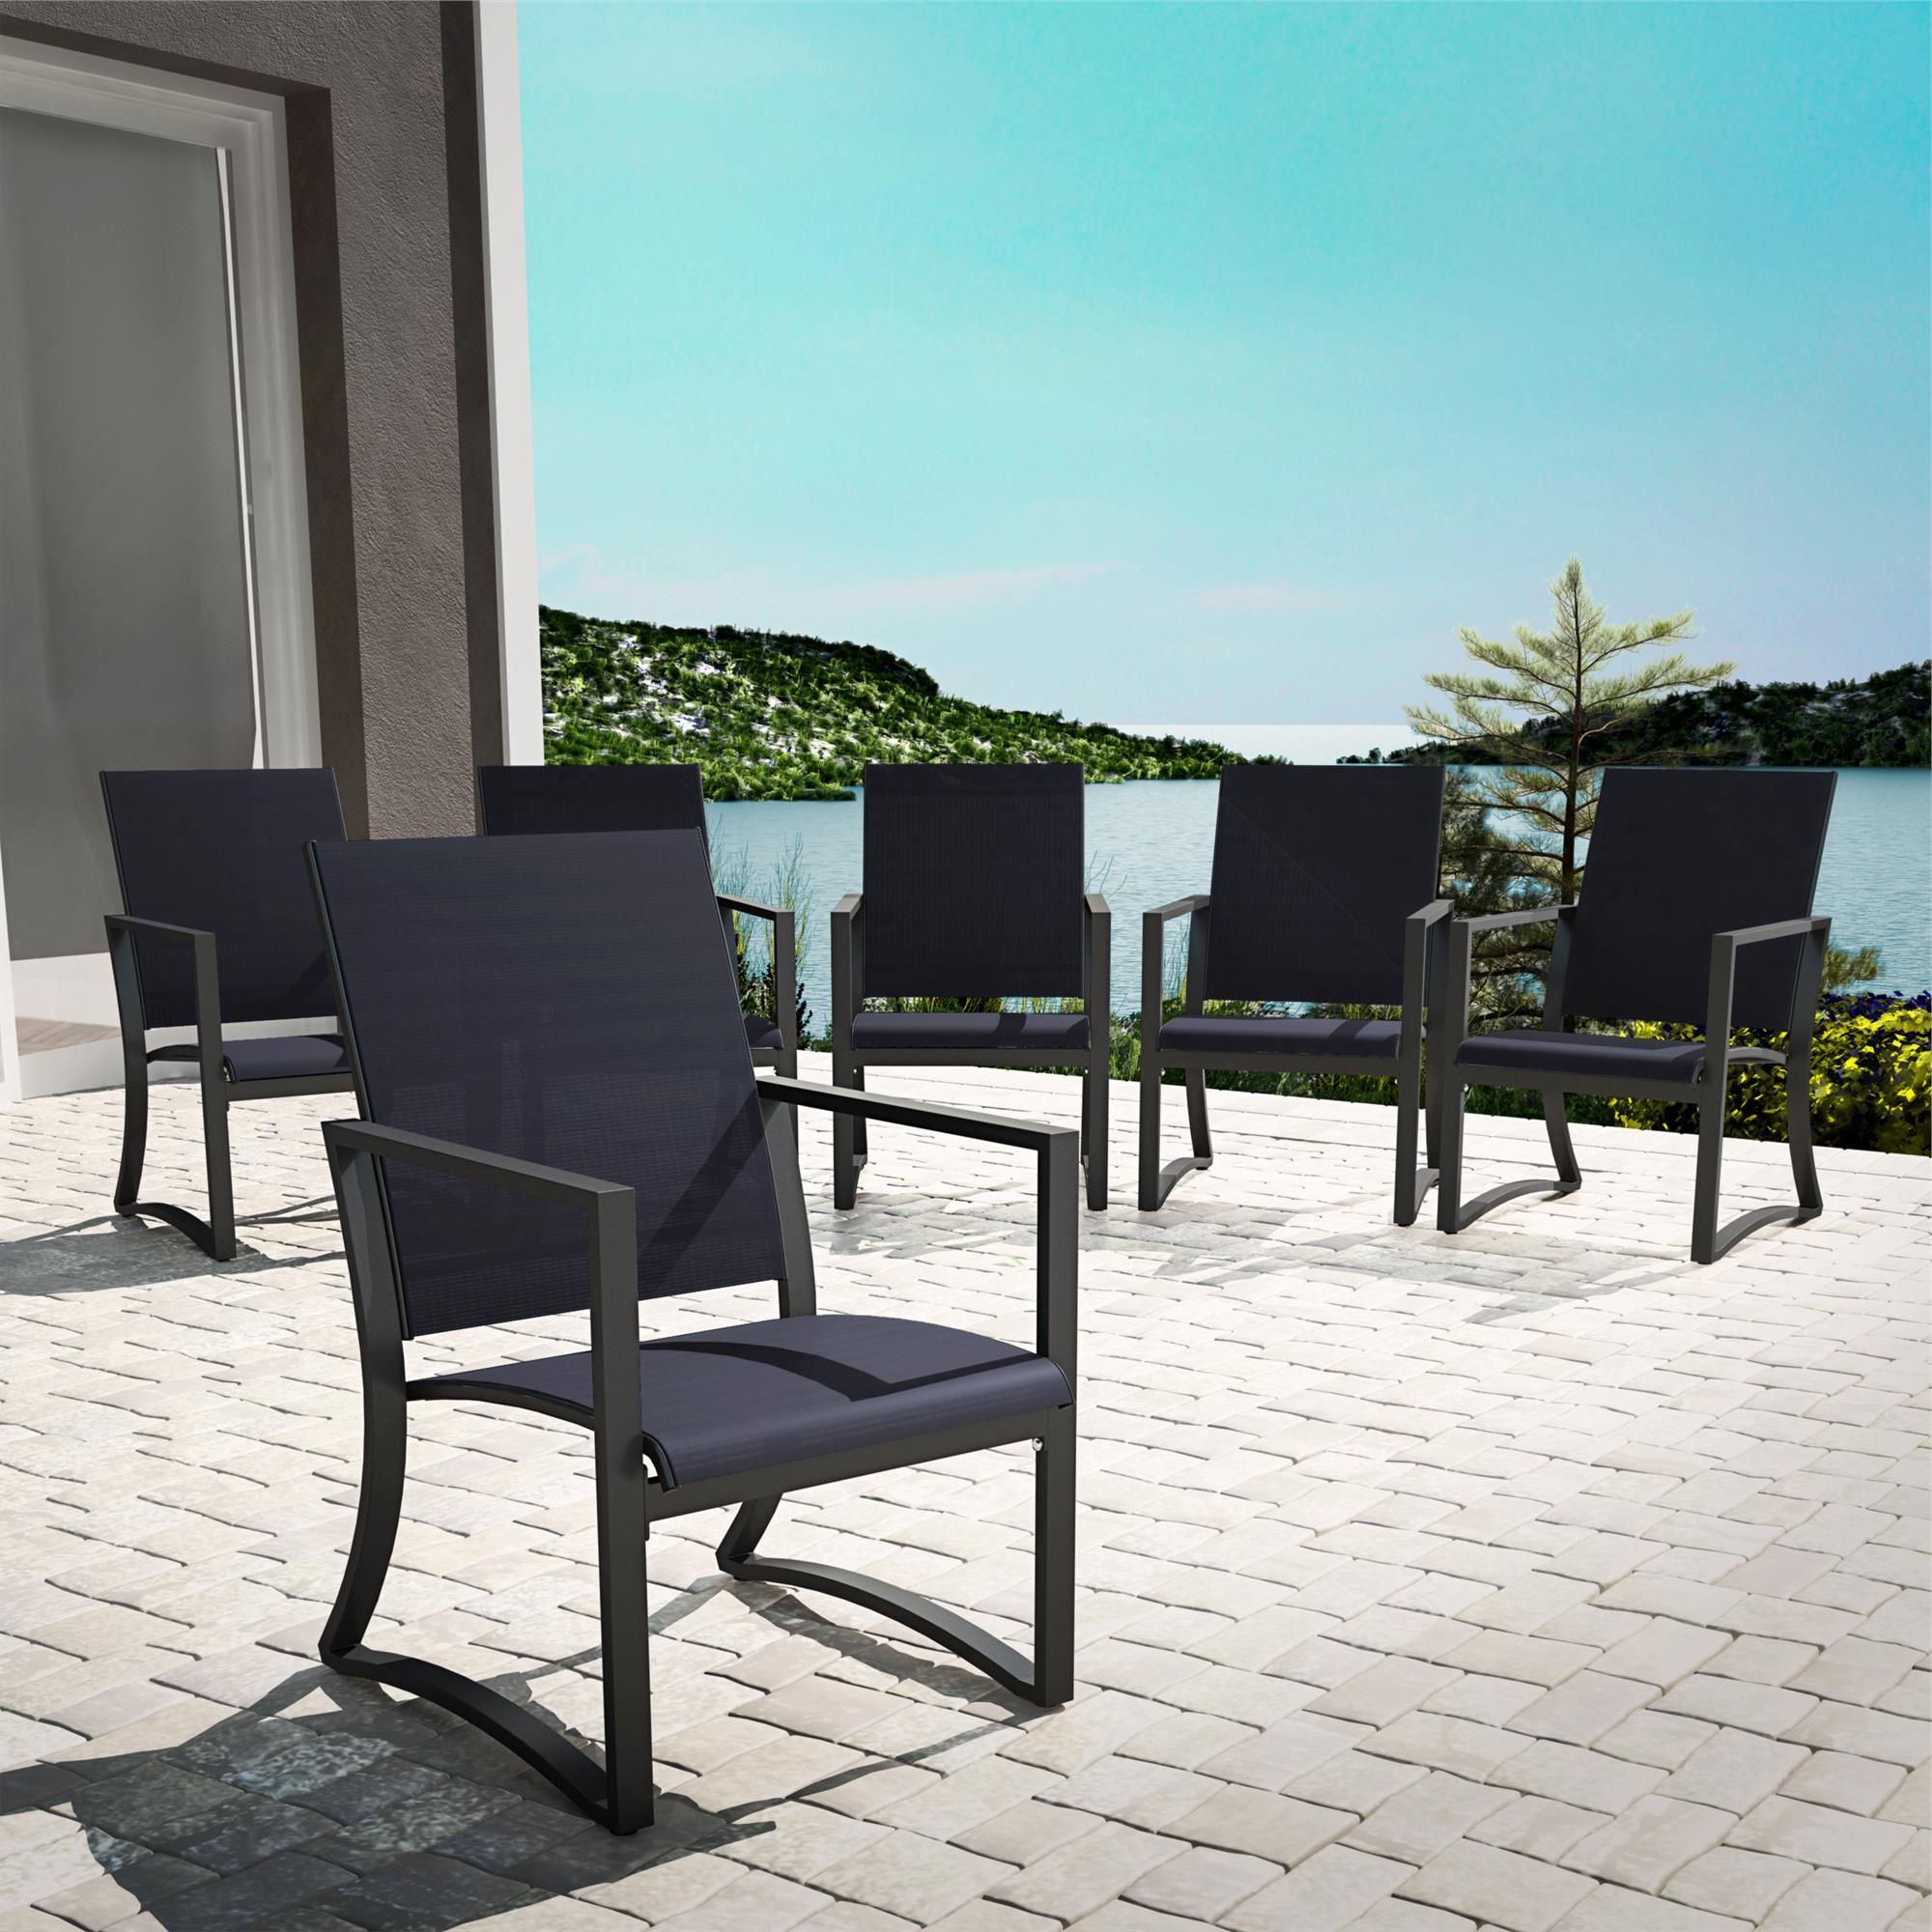 Navy Outdoor Seating Sets In Widely Used Cosco Outdoor Furniture, Patio Dining Chairs, 6 Pack, Steel, Navy Sling (View 1 of 15)